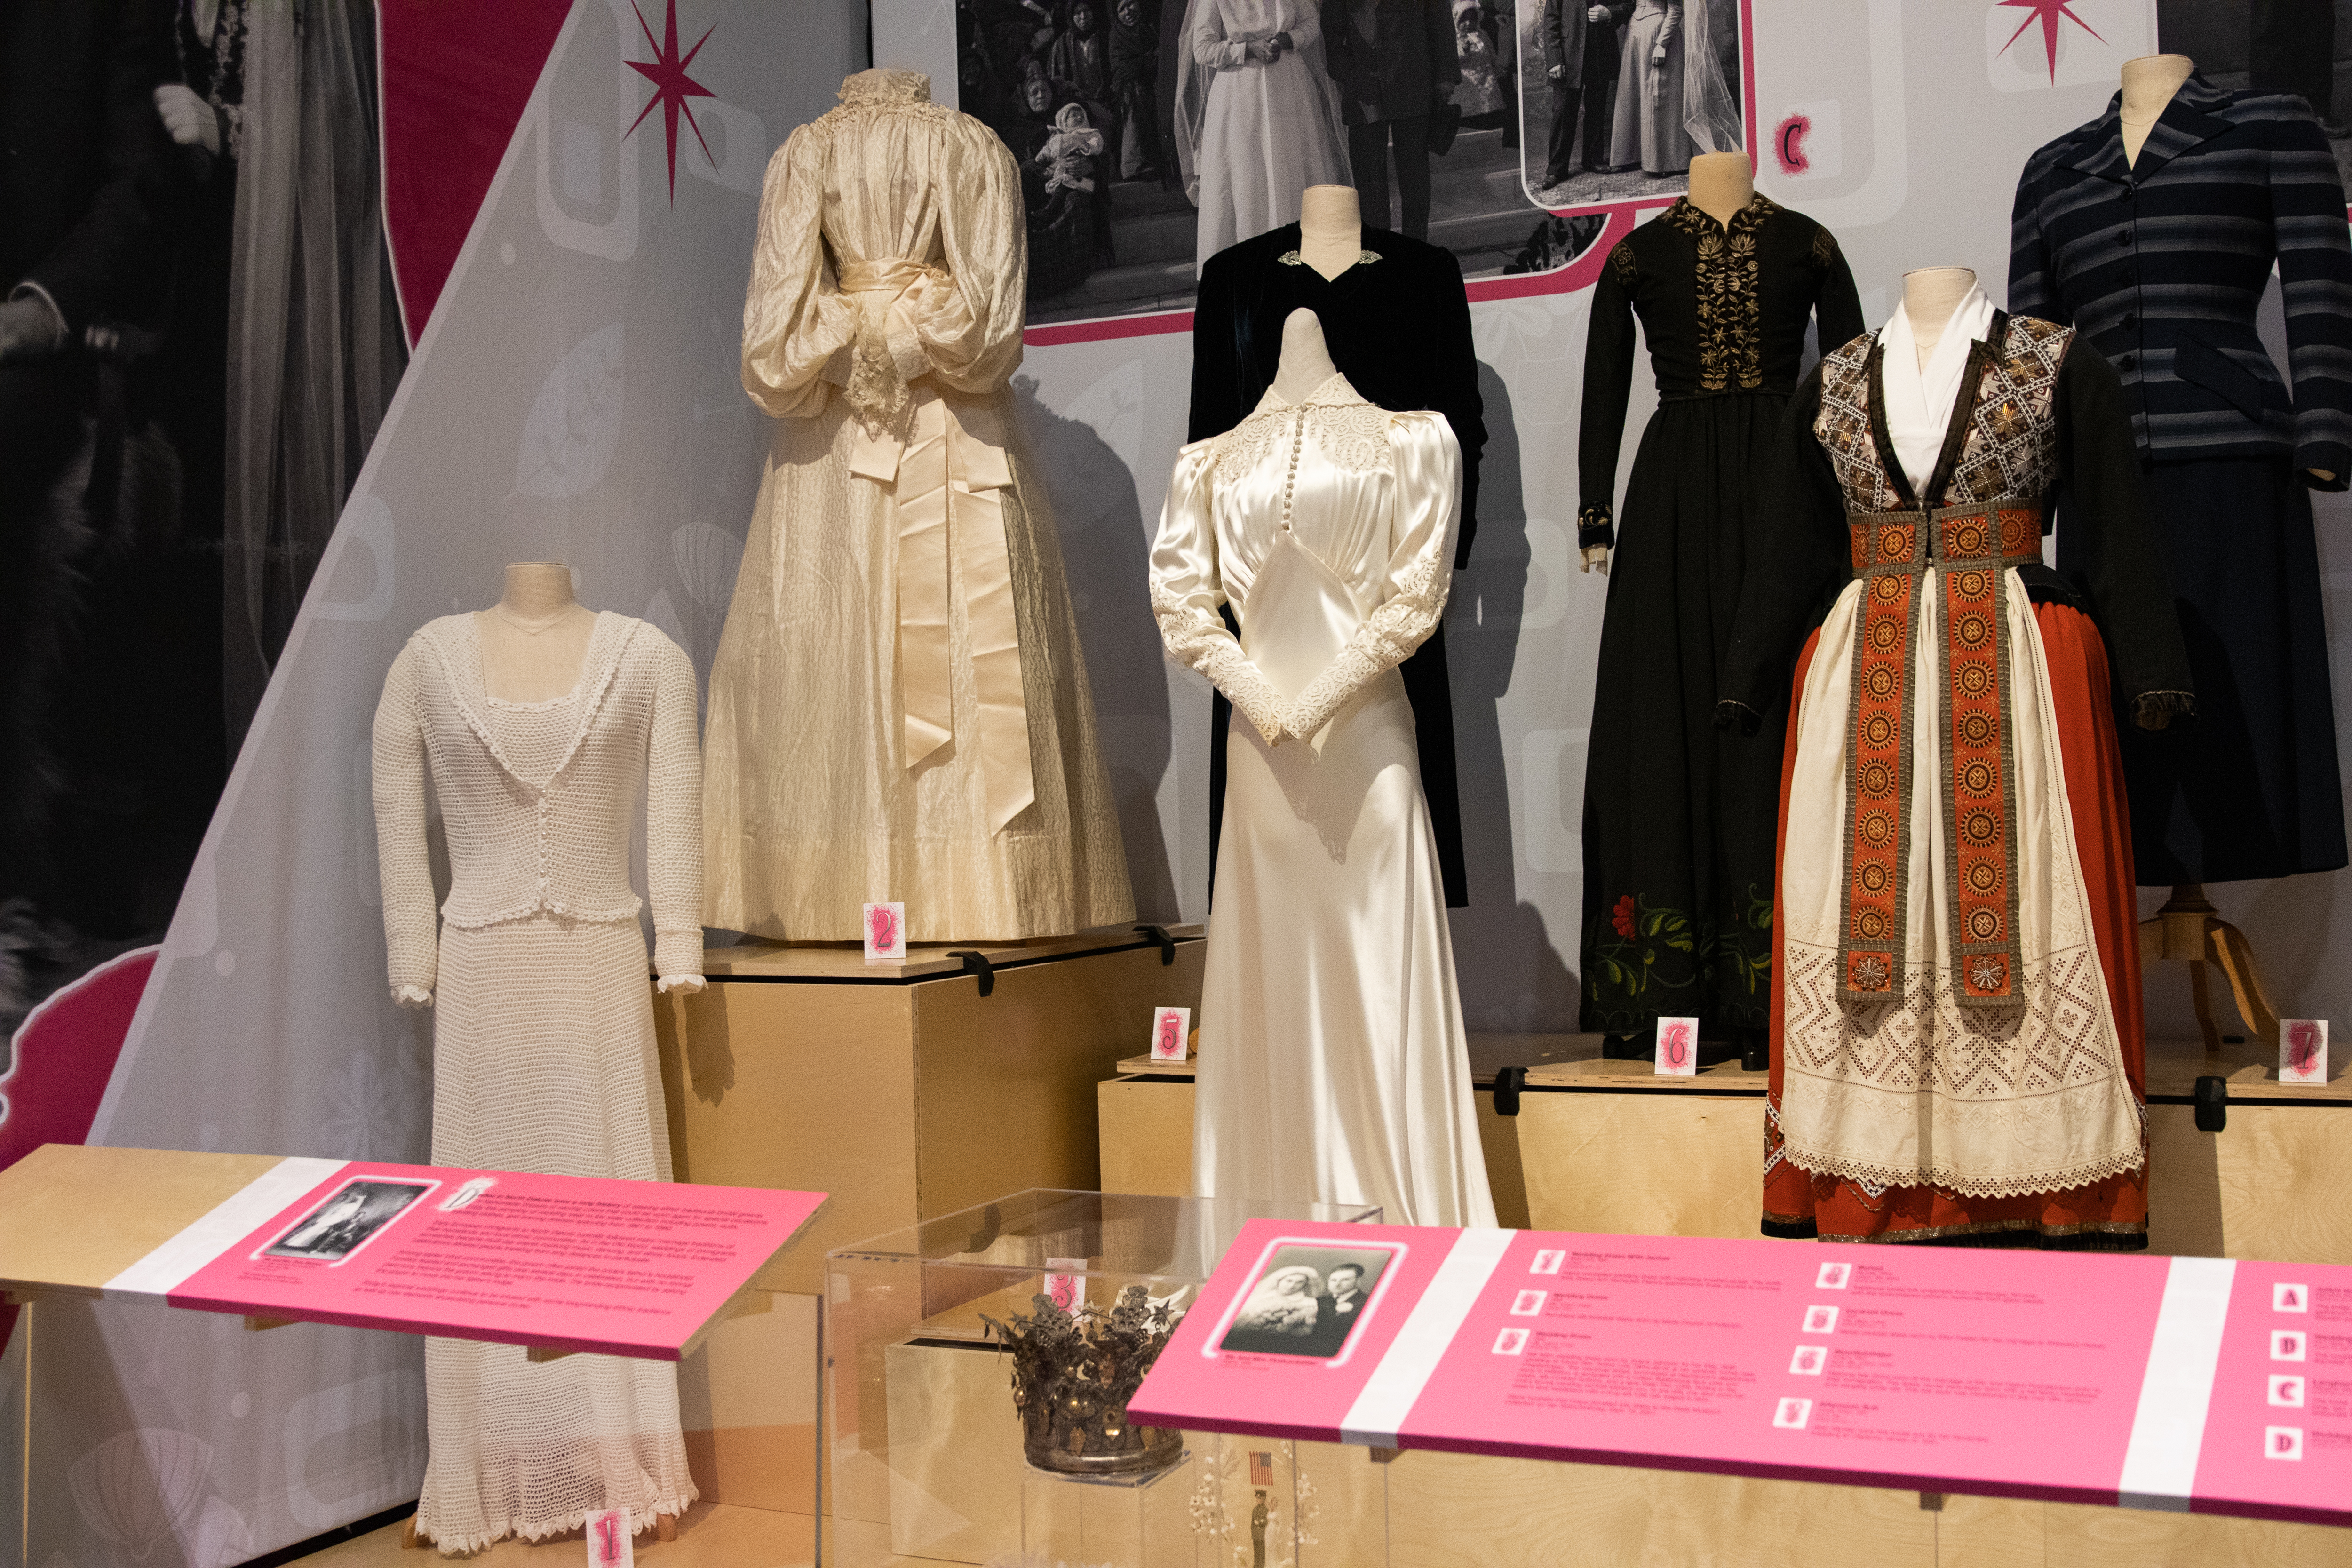 Many mannequins are dressed in different old wedding gowns for a museum display